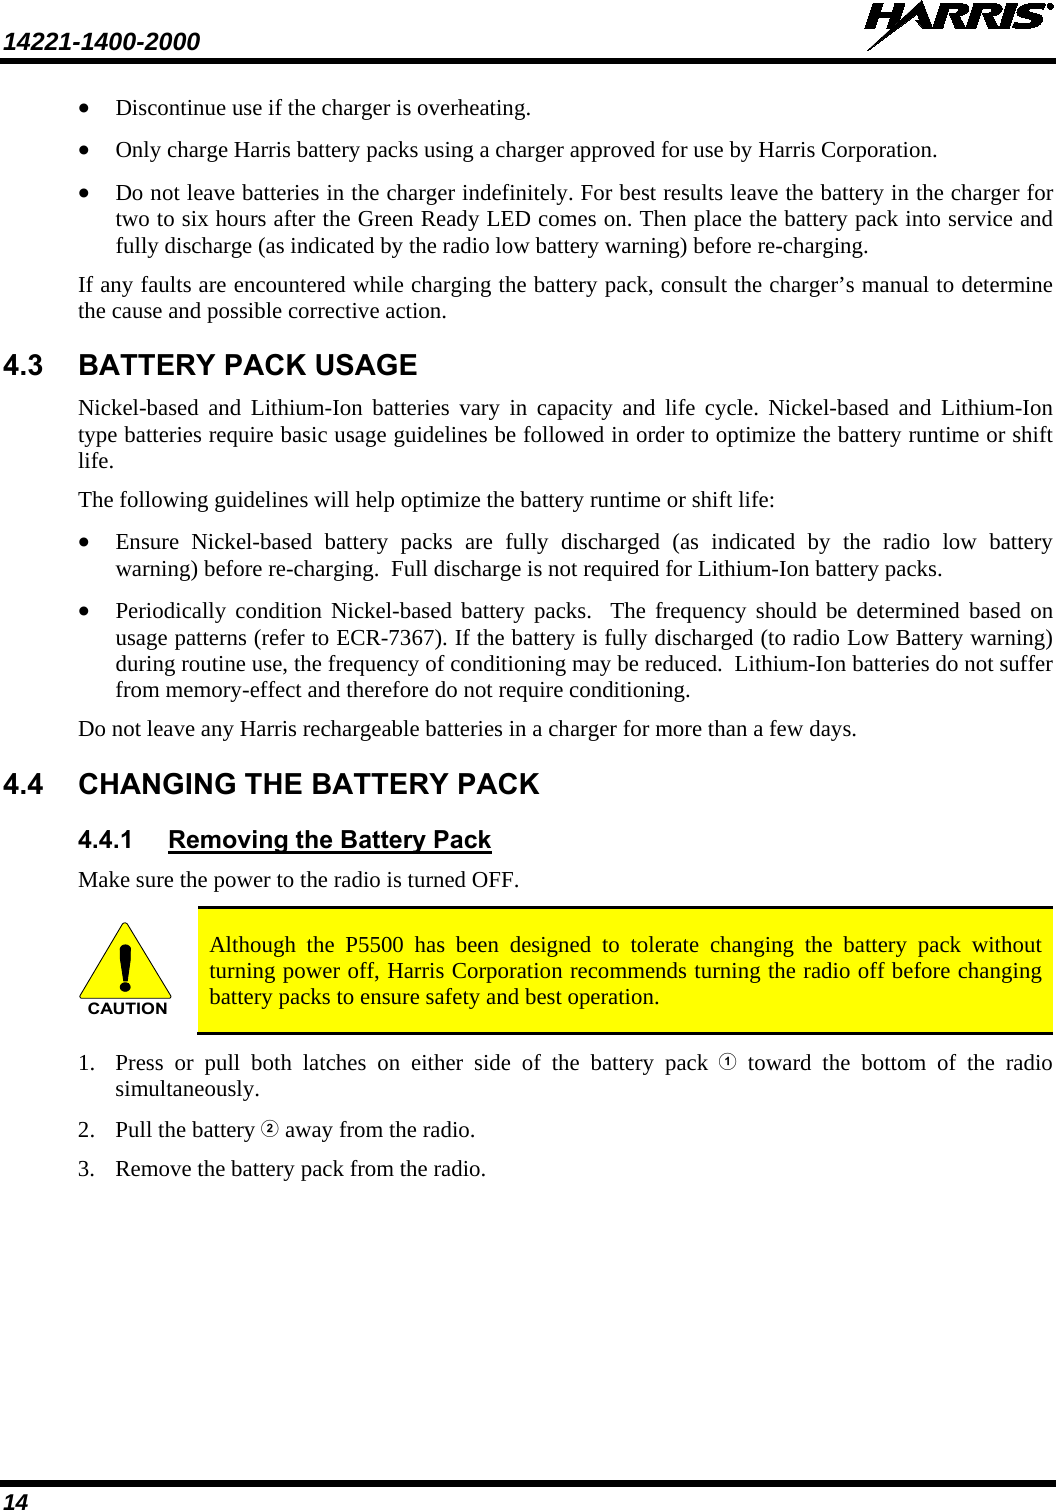 14221-1400-2000    14 • Discontinue use if the charger is overheating. • Only charge Harris battery packs using a charger approved for use by Harris Corporation. • Do not leave batteries in the charger indefinitely. For best results leave the battery in the charger for two to six hours after the Green Ready LED comes on. Then place the battery pack into service and fully discharge (as indicated by the radio low battery warning) before re-charging. If any faults are encountered while charging the battery pack, consult the charger’s manual to determine the cause and possible corrective action. 4.3 BATTERY PACK USAGE Nickel-based and Lithium-Ion  batteries vary in capacity and life cycle. Nickel-based and Lithium-Ion type batteries require basic usage guidelines be followed in order to optimize the battery runtime or shift life. The following guidelines will help optimize the battery runtime or shift life: • Ensure Nickel-based battery packs are fully discharged (as indicated by the radio low battery warning) before re-charging.  Full discharge is not required for Lithium-Ion battery packs. • Periodically condition Nickel-based battery packs.  The frequency should be determined based on usage patterns (refer to ECR-7367). If the battery is fully discharged (to radio Low Battery warning) during routine use, the frequency of conditioning may be reduced.  Lithium-Ion batteries do not suffer from memory-effect and therefore do not require conditioning. Do not leave any Harris rechargeable batteries in a charger for more than a few days.  4.4 CHANGING THE BATTERY PACK 4.4.1 Removing the Battery Pack Make sure the power to the radio is turned OFF. CAUTION Although the P5500 has been designed to tolerate changing the battery pack without turning power off, Harris Corporation recommends turning the radio off before changing battery packs to ensure safety and best operation. 1. Press or pull both latches on either side of the battery pack  toward the bottom of the radio simultaneously.  2. Pull the battery  away from the radio. 3. Remove the battery pack from the radio.  